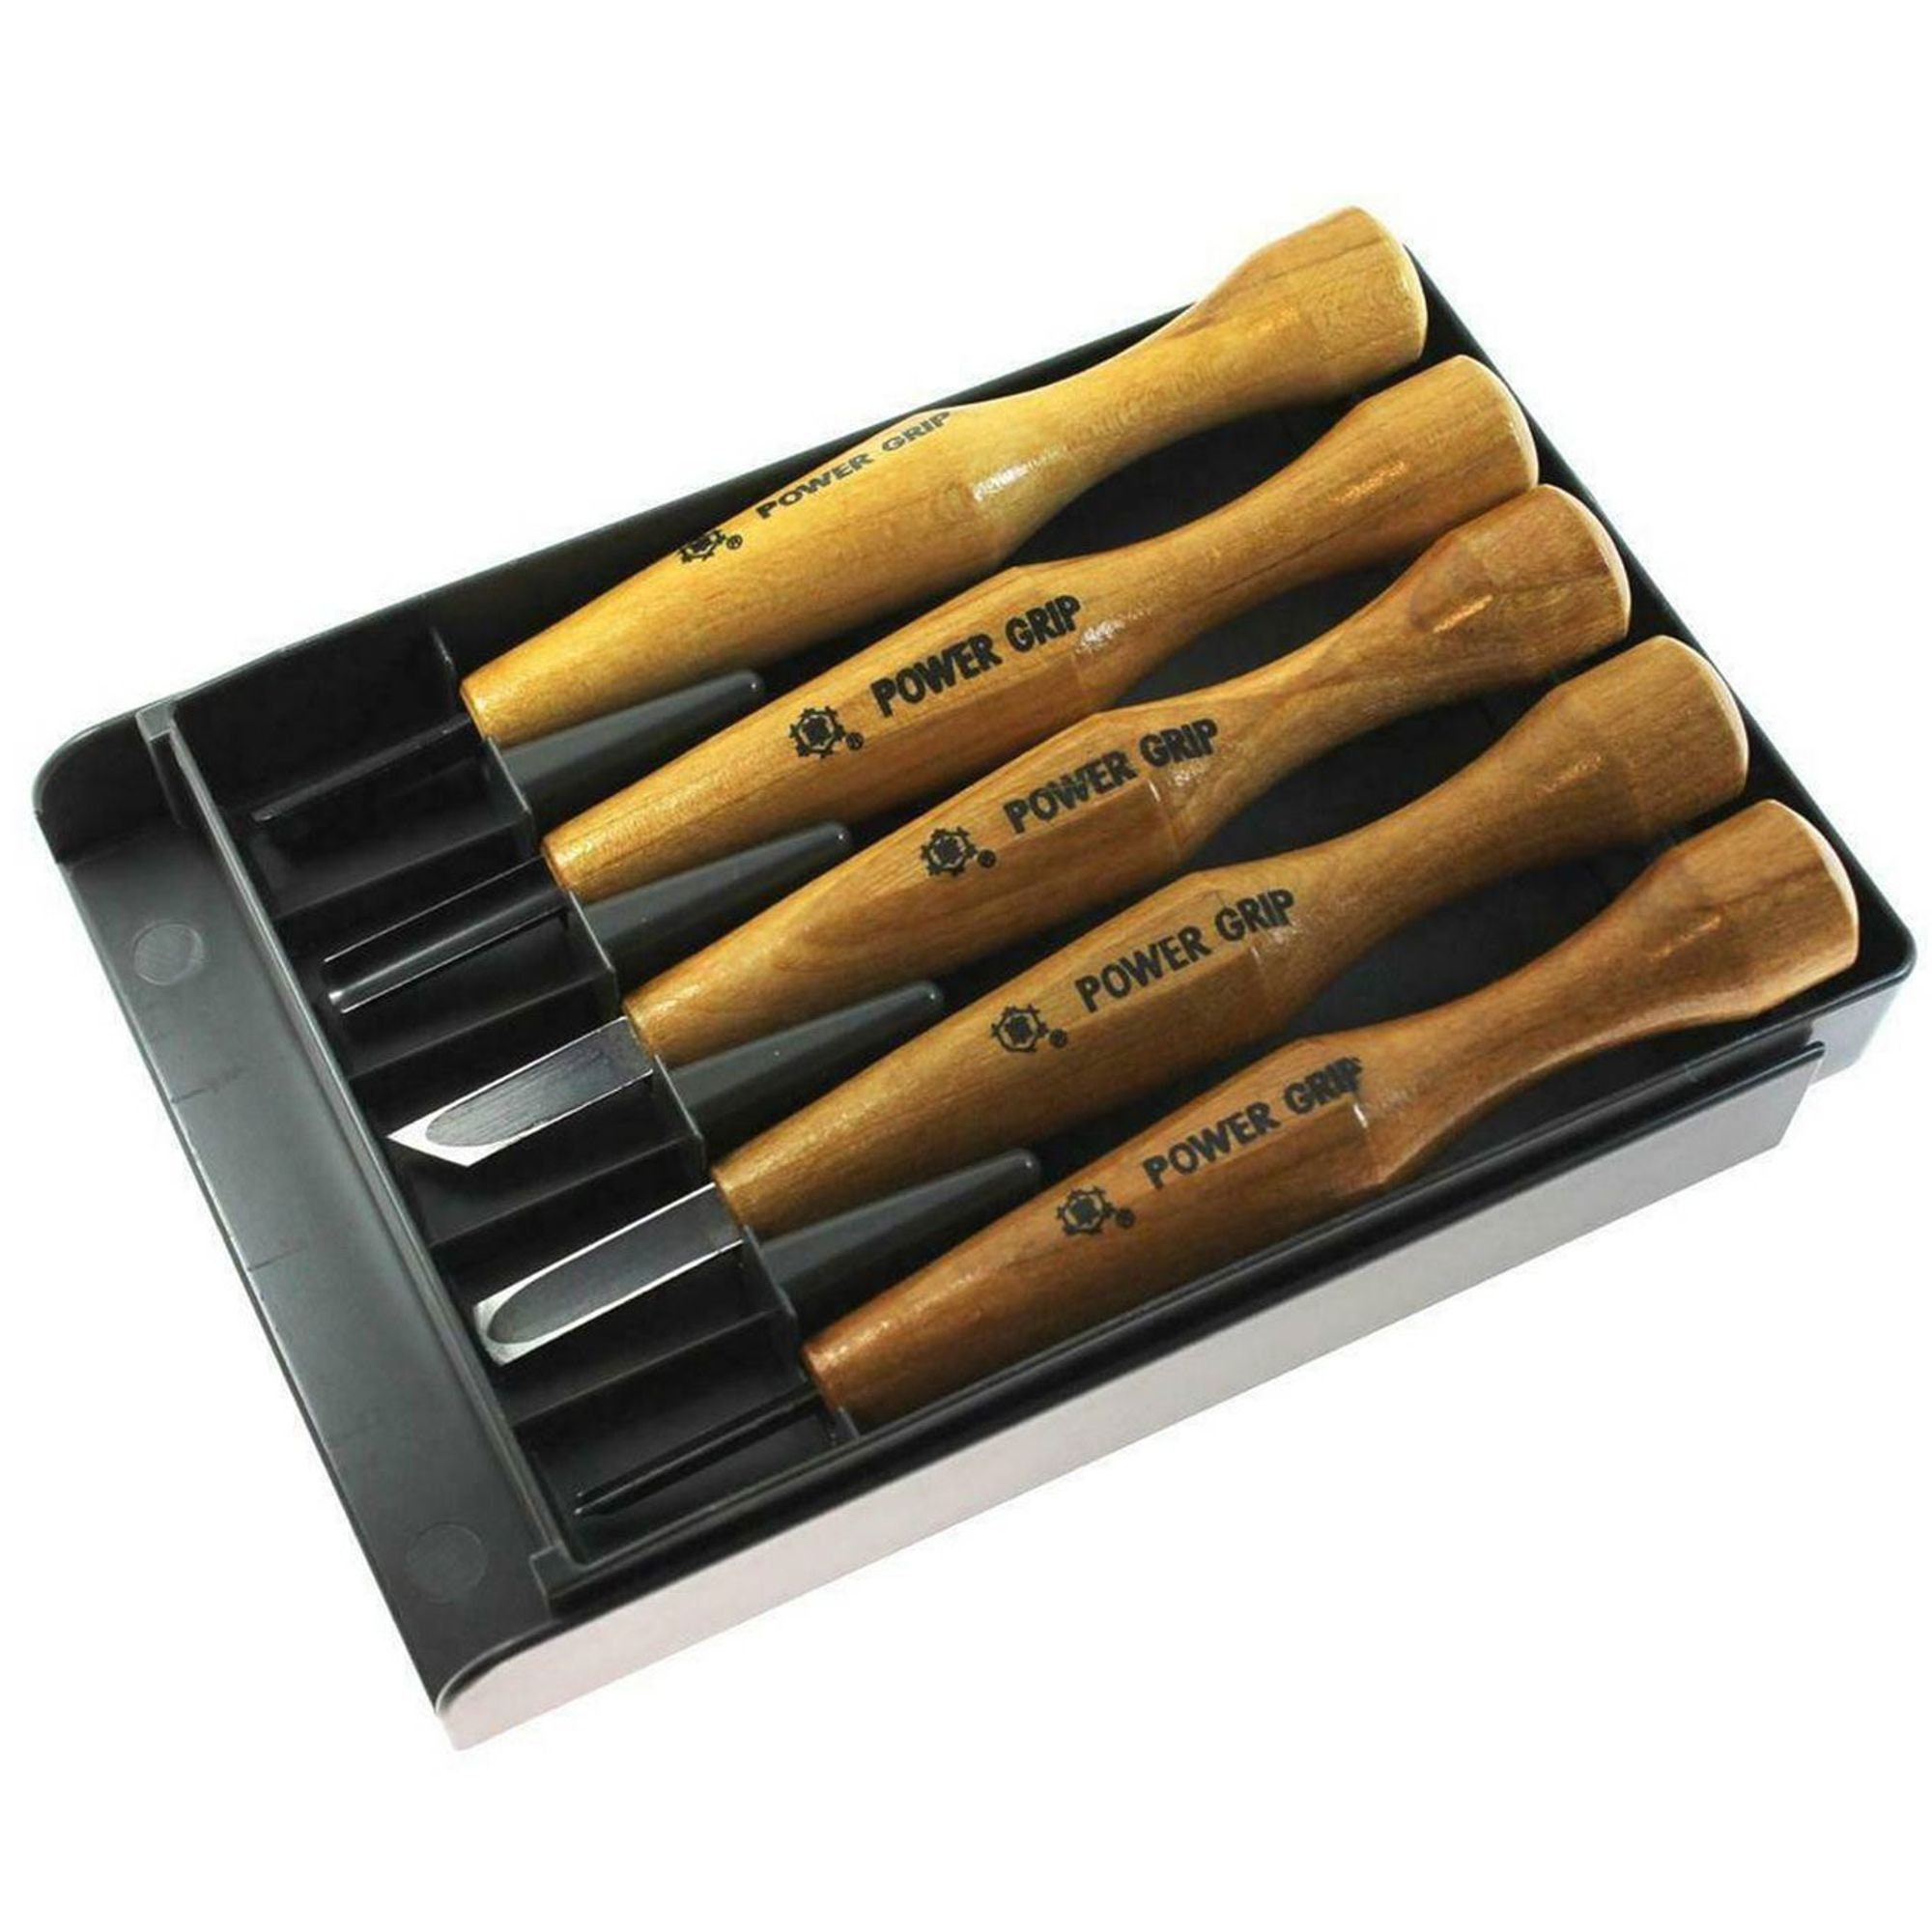 Mikisyo Power Grip Woodcarving 7-Piece Set Gouges & Chisels Wood Carving  Tool Kit, with Red Beech Wood Handles, for Woodworking